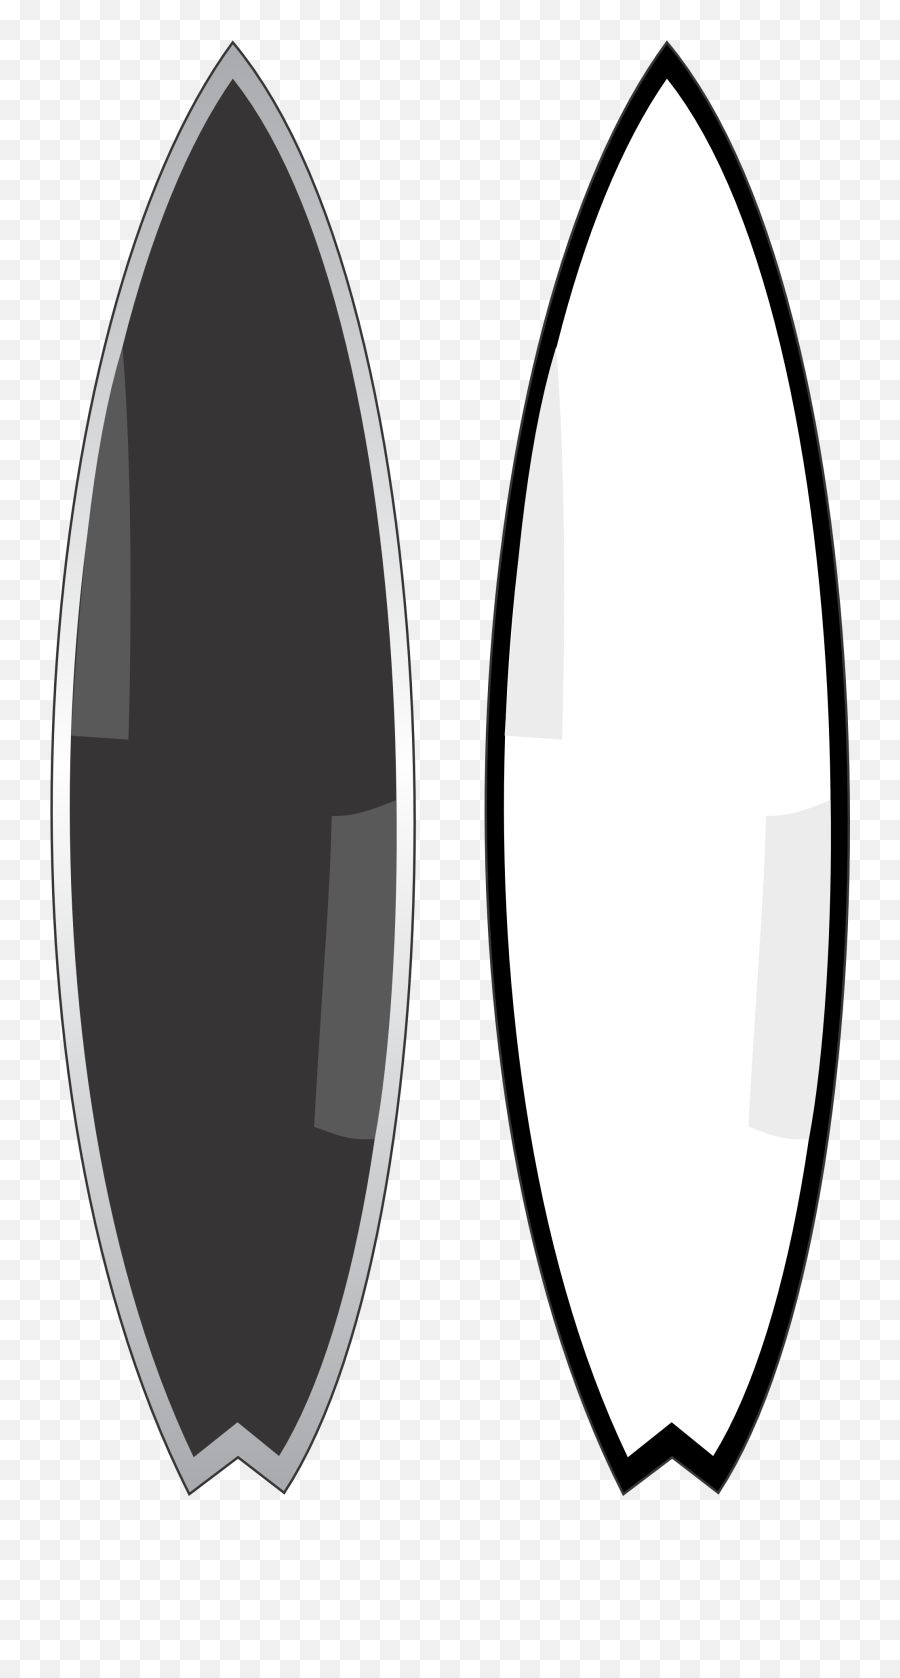 Download Tropical Surfboard Surfing Surf Pictures Of 2 - Black And White Surfboard Cartoon Png,Surfboard Png